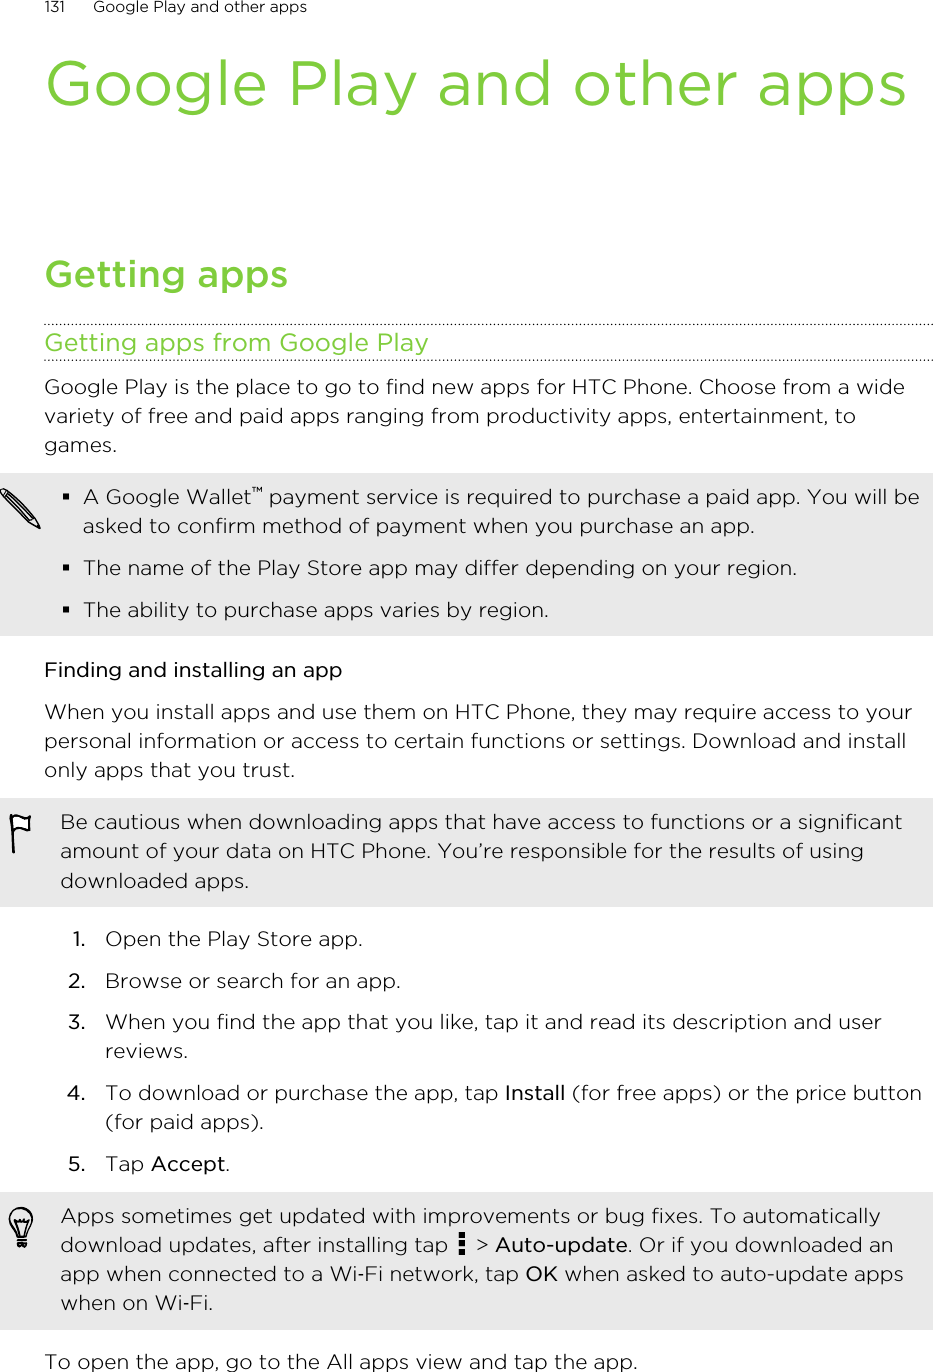 Google Play and other appsGetting appsGetting apps from Google PlayGoogle Play is the place to go to find new apps for HTC Phone. Choose from a widevariety of free and paid apps ranging from productivity apps, entertainment, togames.§A Google Wallet™ payment service is required to purchase a paid app. You will beasked to confirm method of payment when you purchase an app.§The name of the Play Store app may differ depending on your region.§The ability to purchase apps varies by region.Finding and installing an appWhen you install apps and use them on HTC Phone, they may require access to yourpersonal information or access to certain functions or settings. Download and installonly apps that you trust.Be cautious when downloading apps that have access to functions or a significantamount of your data on HTC Phone. You’re responsible for the results of usingdownloaded apps.1. Open the Play Store app.2. Browse or search for an app.3. When you find the app that you like, tap it and read its description and userreviews.4. To download or purchase the app, tap Install (for free apps) or the price button(for paid apps).5. Tap Accept. Apps sometimes get updated with improvements or bug fixes. To automaticallydownload updates, after installing tap   &gt; Auto-update. Or if you downloaded anapp when connected to a Wi‑Fi network, tap OK when asked to auto-update appswhen on Wi‑Fi.To open the app, go to the All apps view and tap the app.131 Google Play and other apps